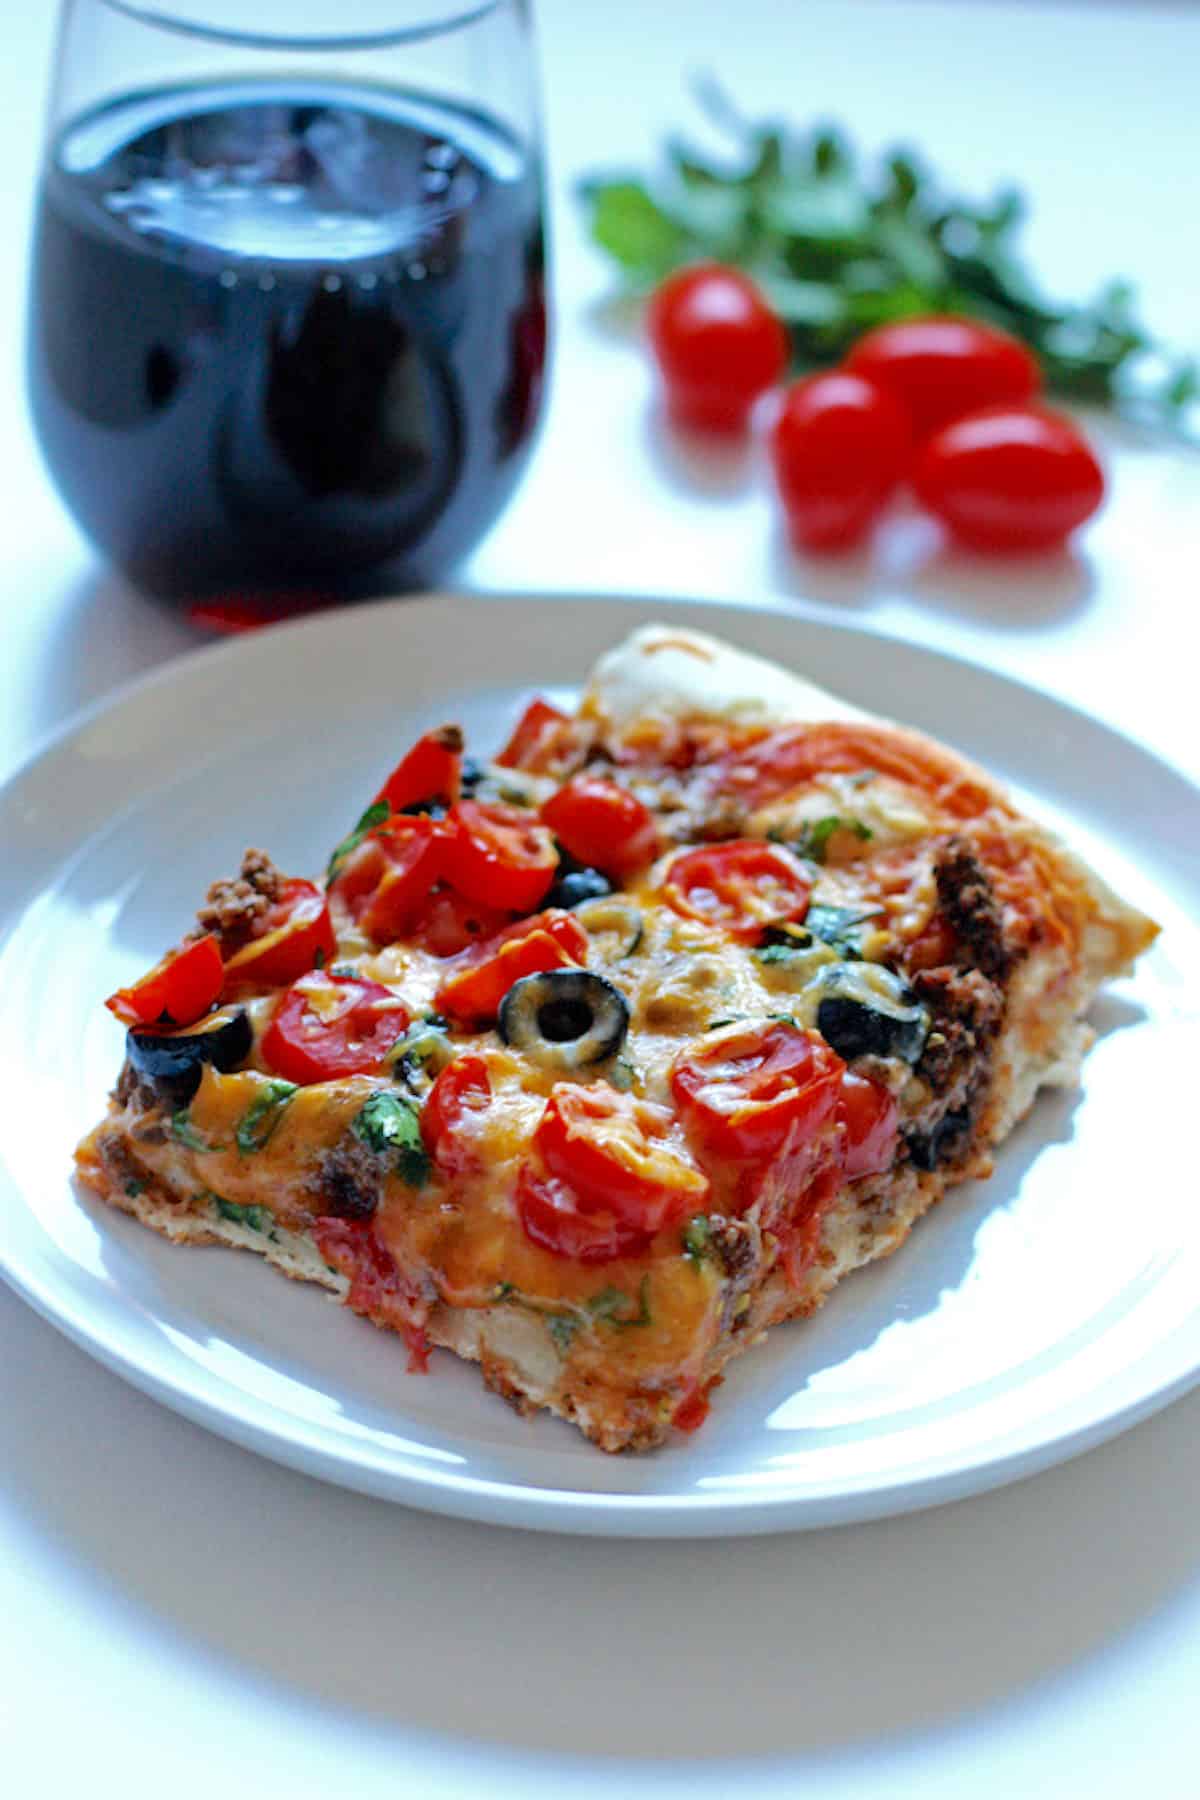 A square slice of taco pizza topped with cheese, black olives, and tomatoes, with a glass of wine behind it.